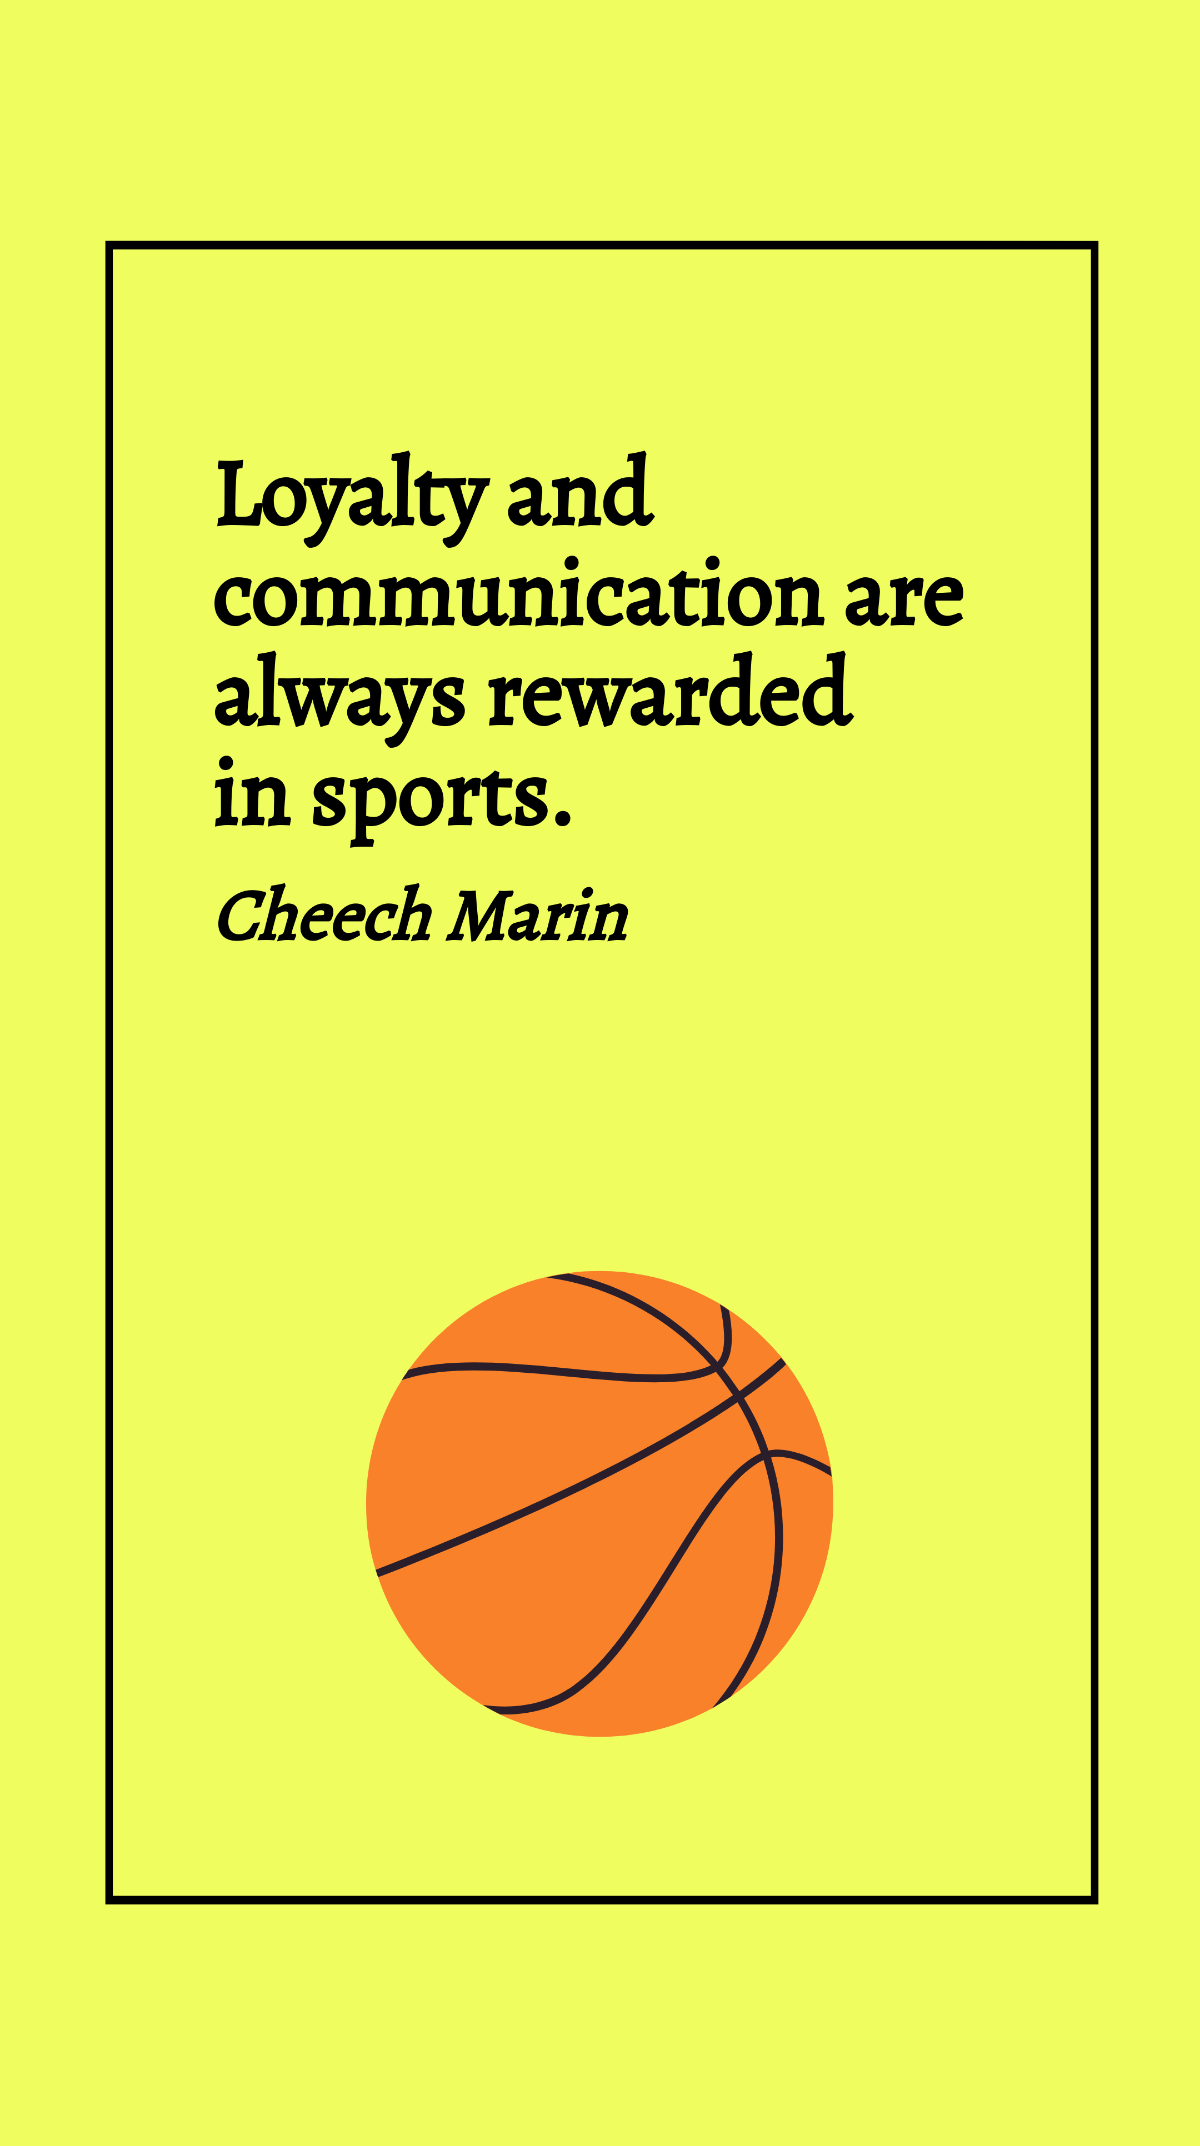 Free Cheech Marin - Loyalty and communication are always rewarded in sports. Template